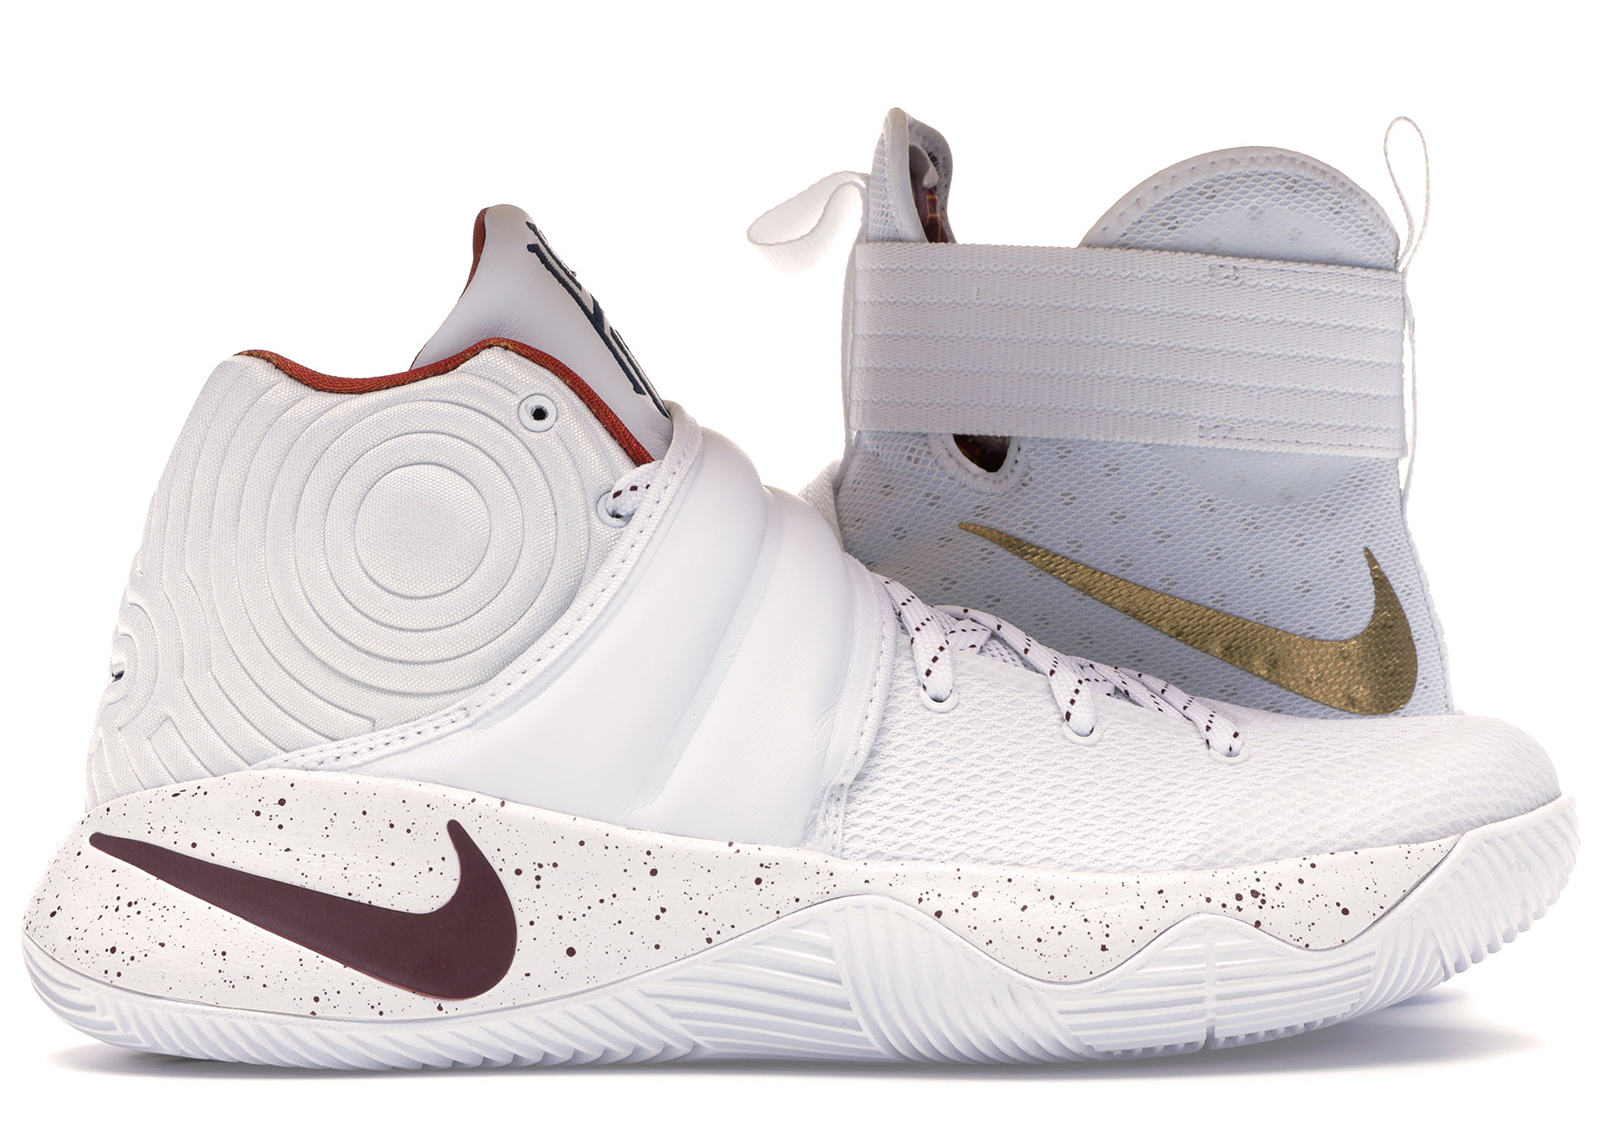 kyrie 2 championship pack